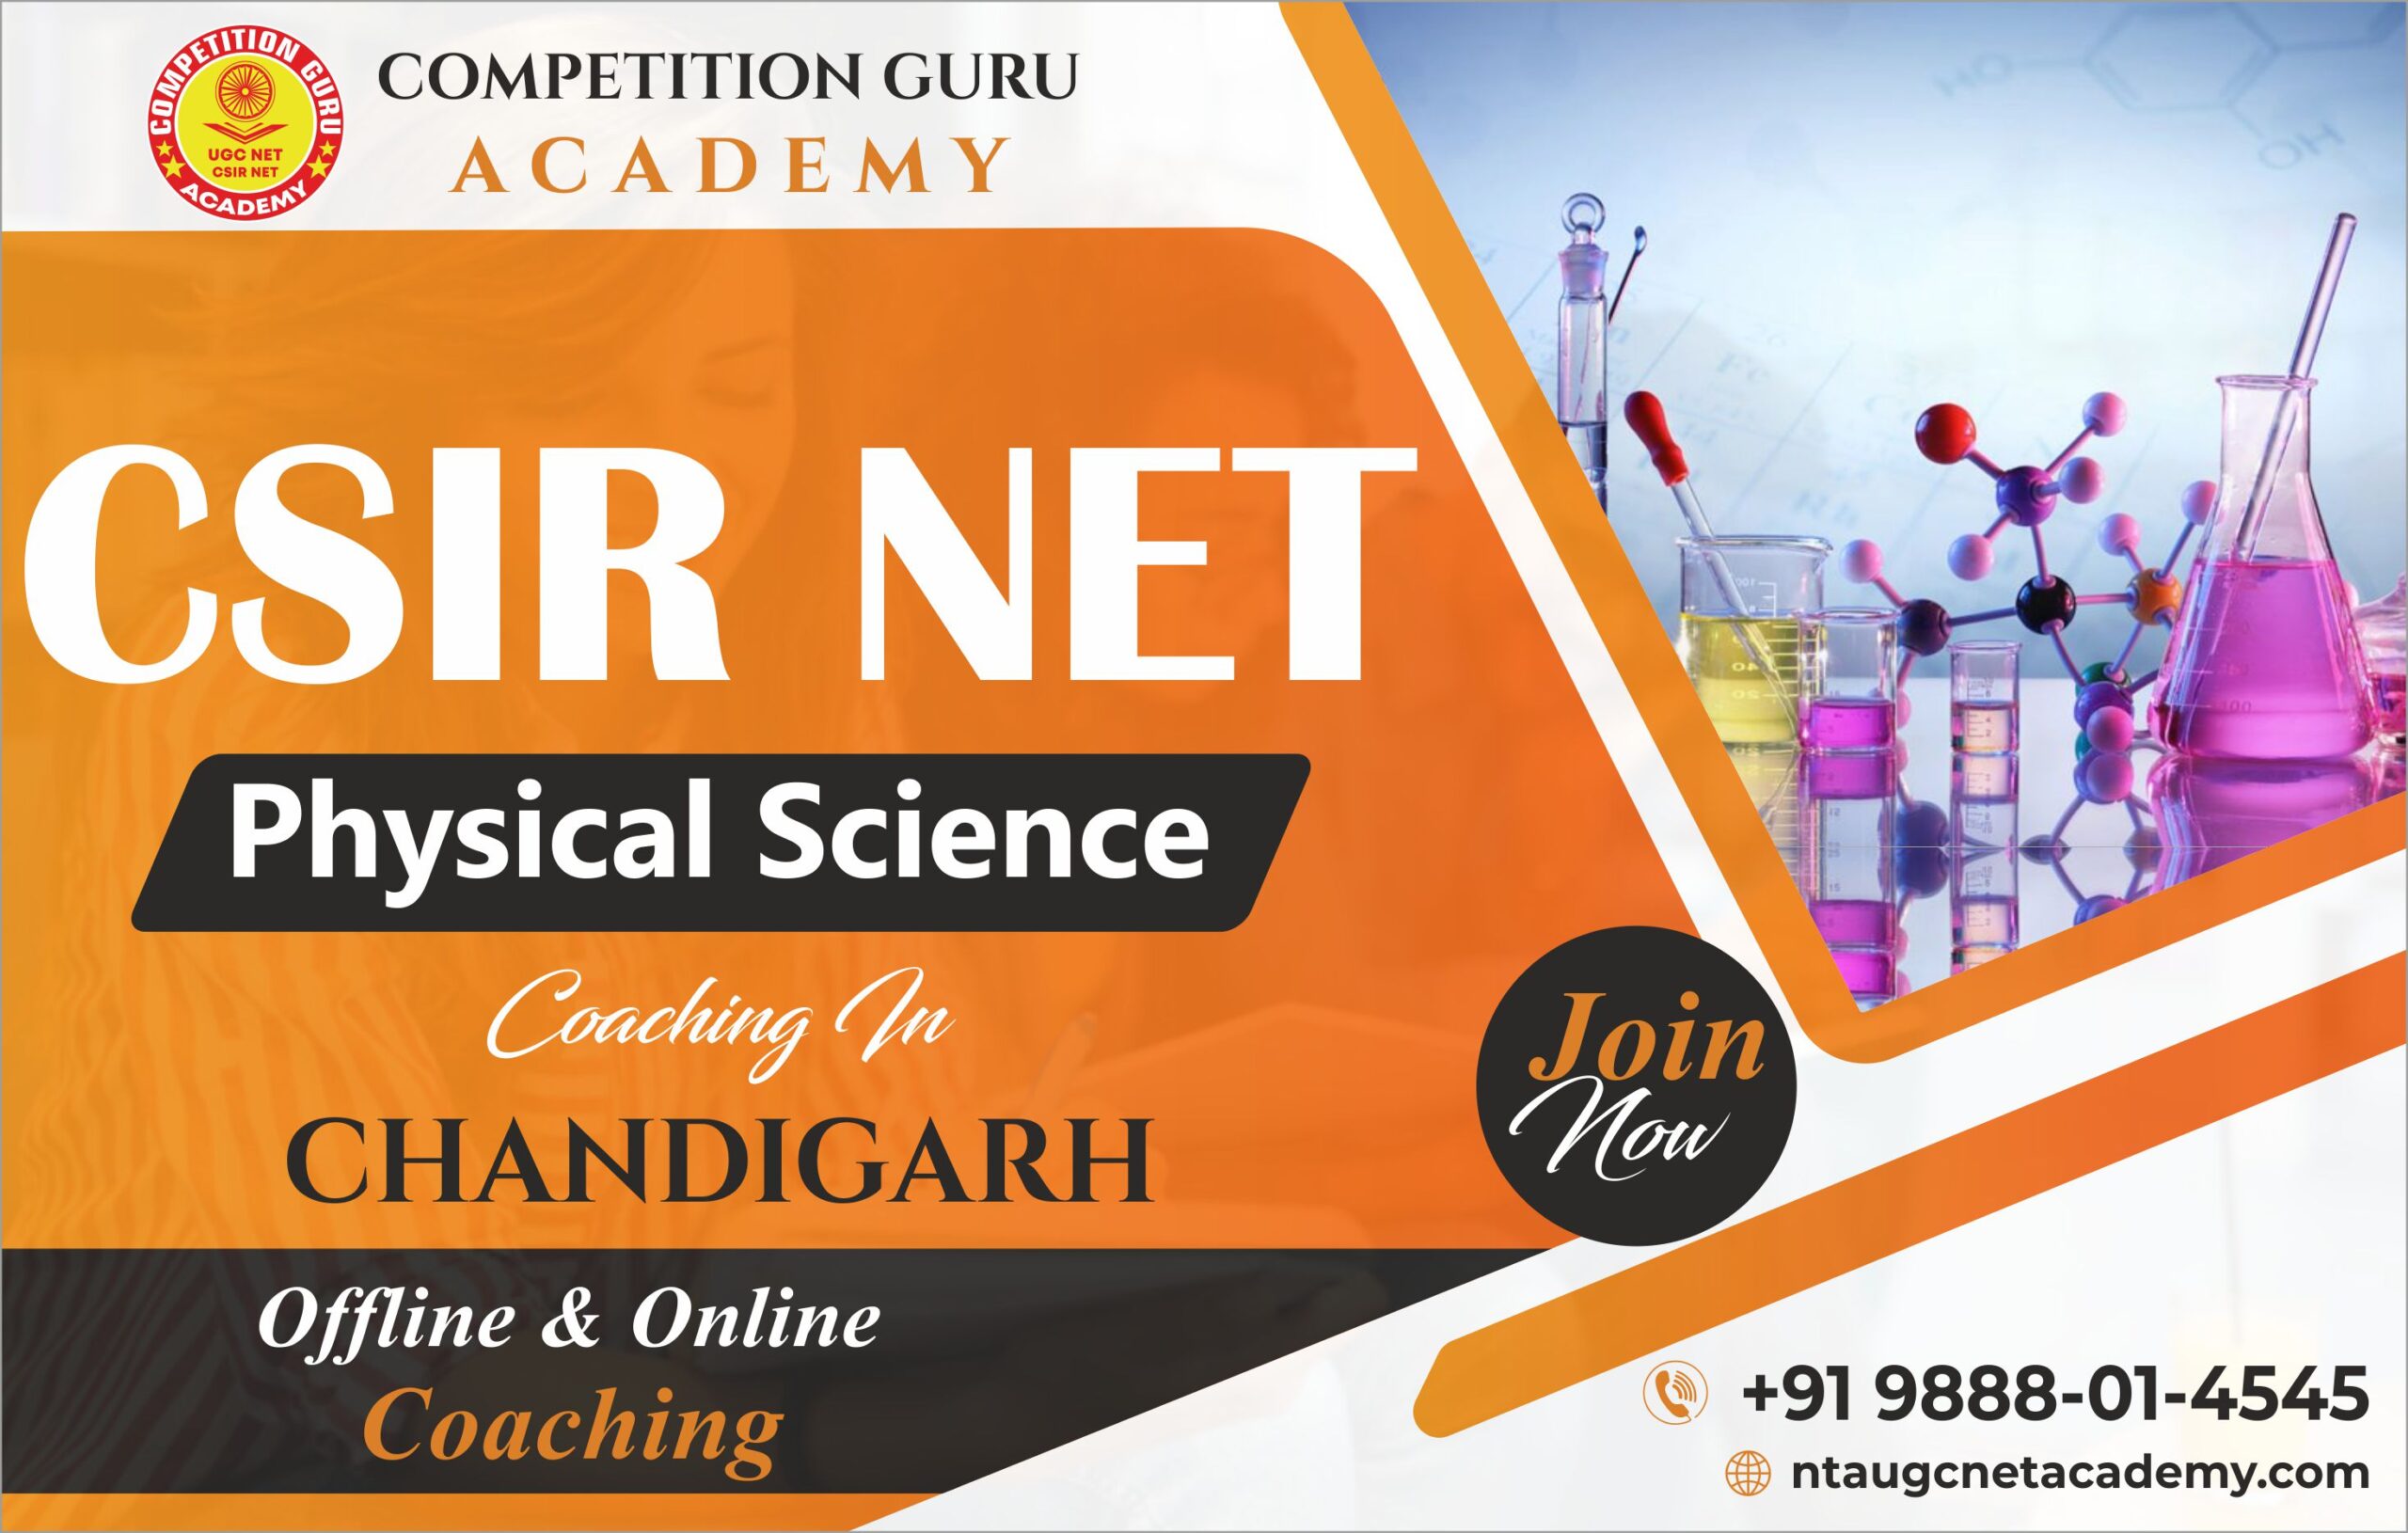 csir-net-physical-science-coaching-in-chandigarh